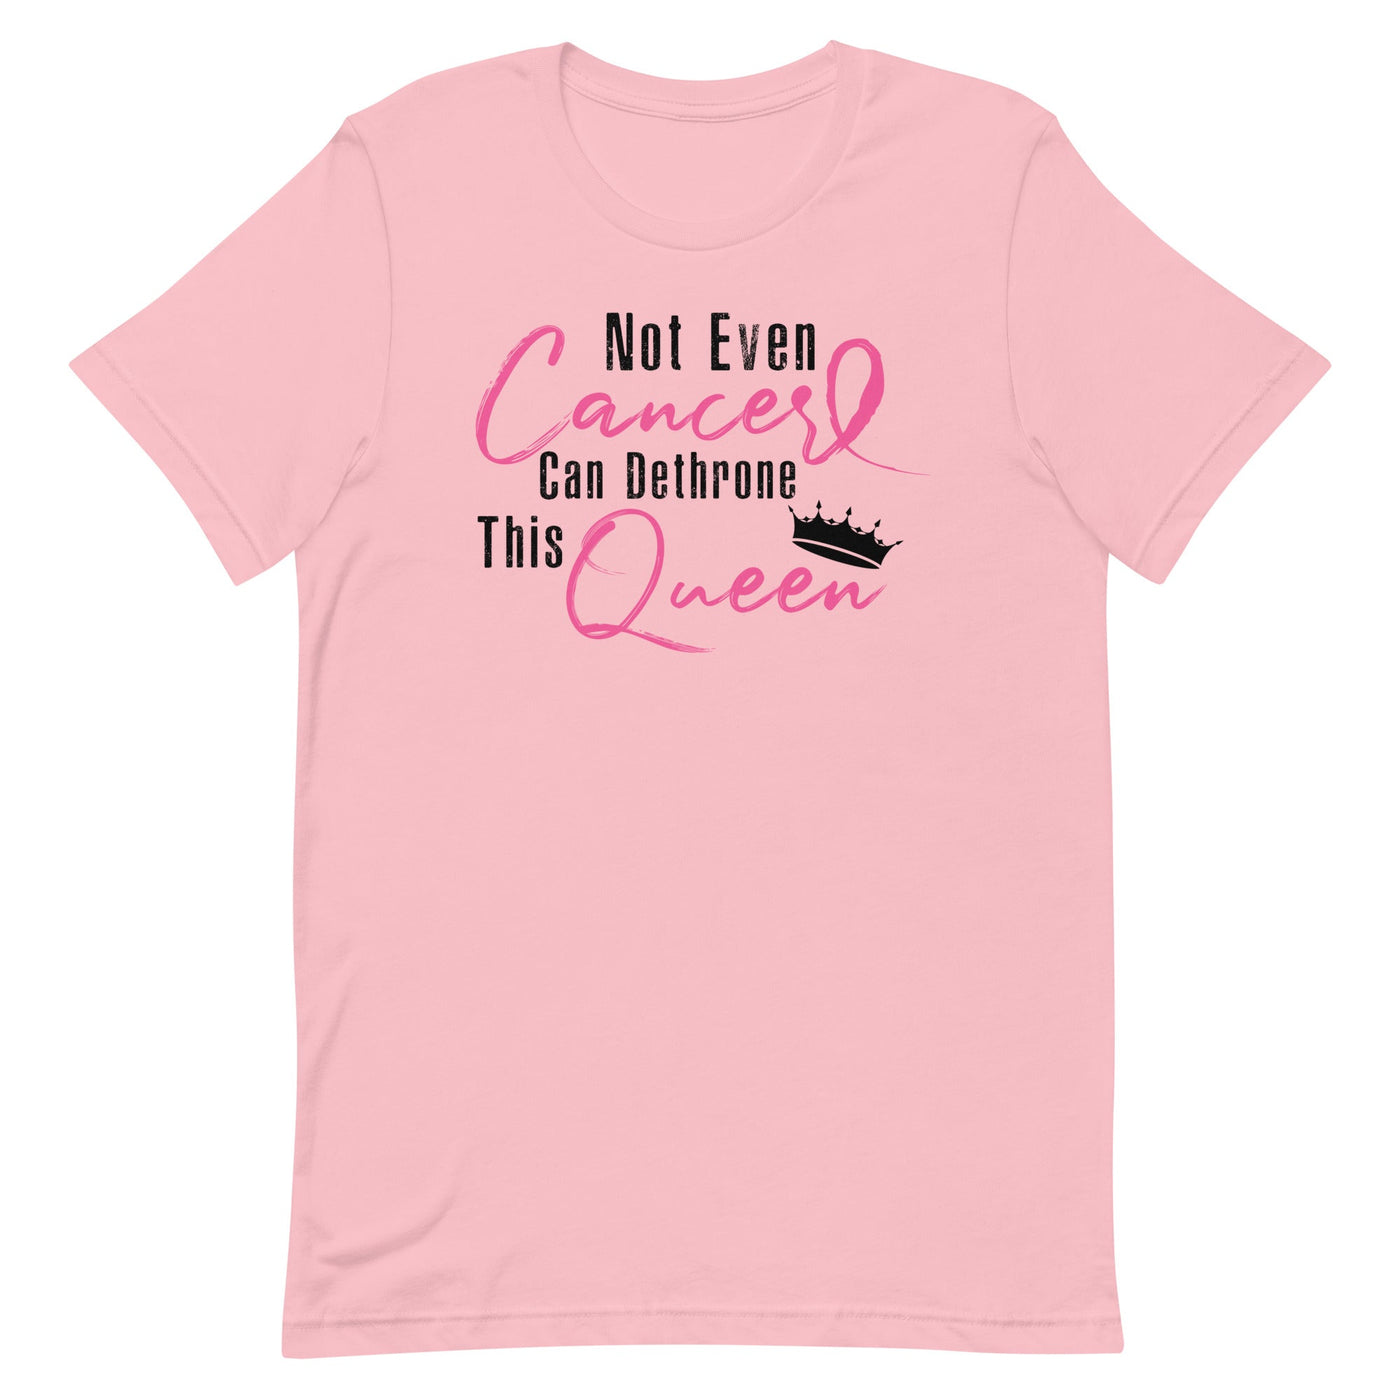 NOT EVEN CANCER CAN DETHRONE THIS QUEEN WOMEN'S T-SHIRT- BLACK AND PINK FONT Pink S 